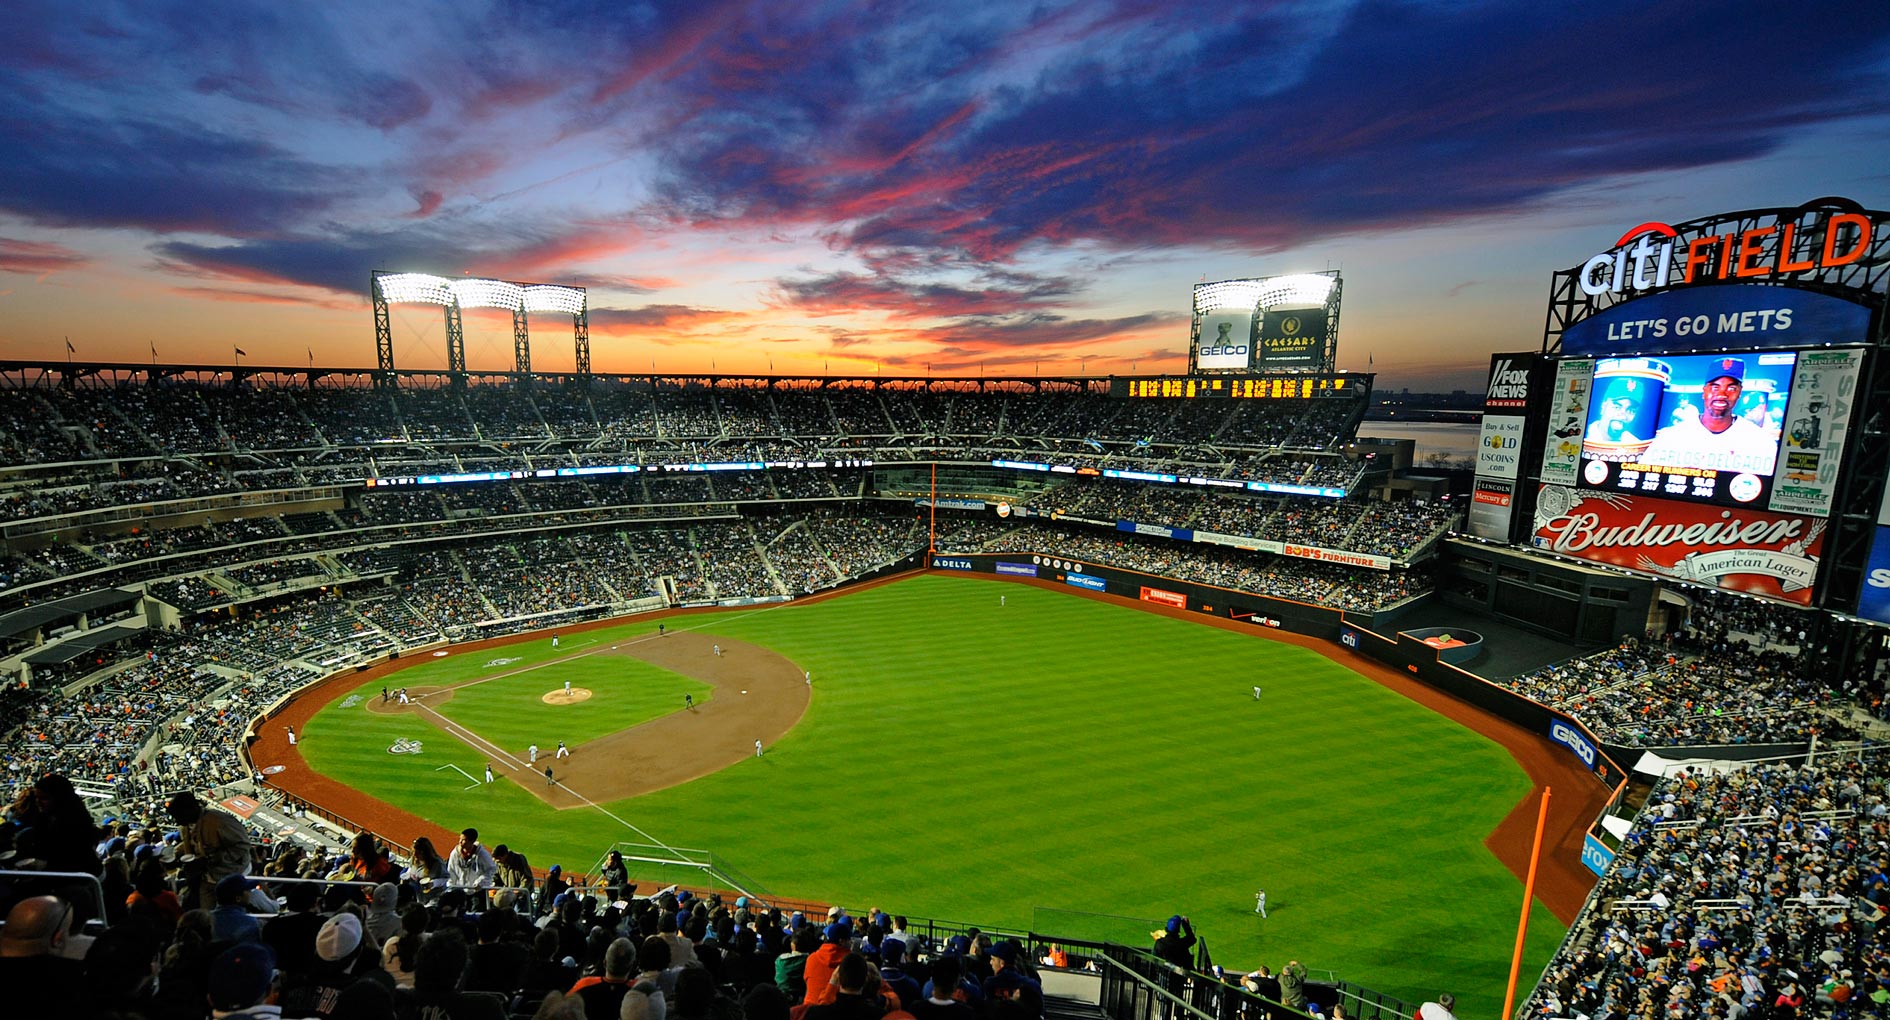 CitiField stadium at night during a game